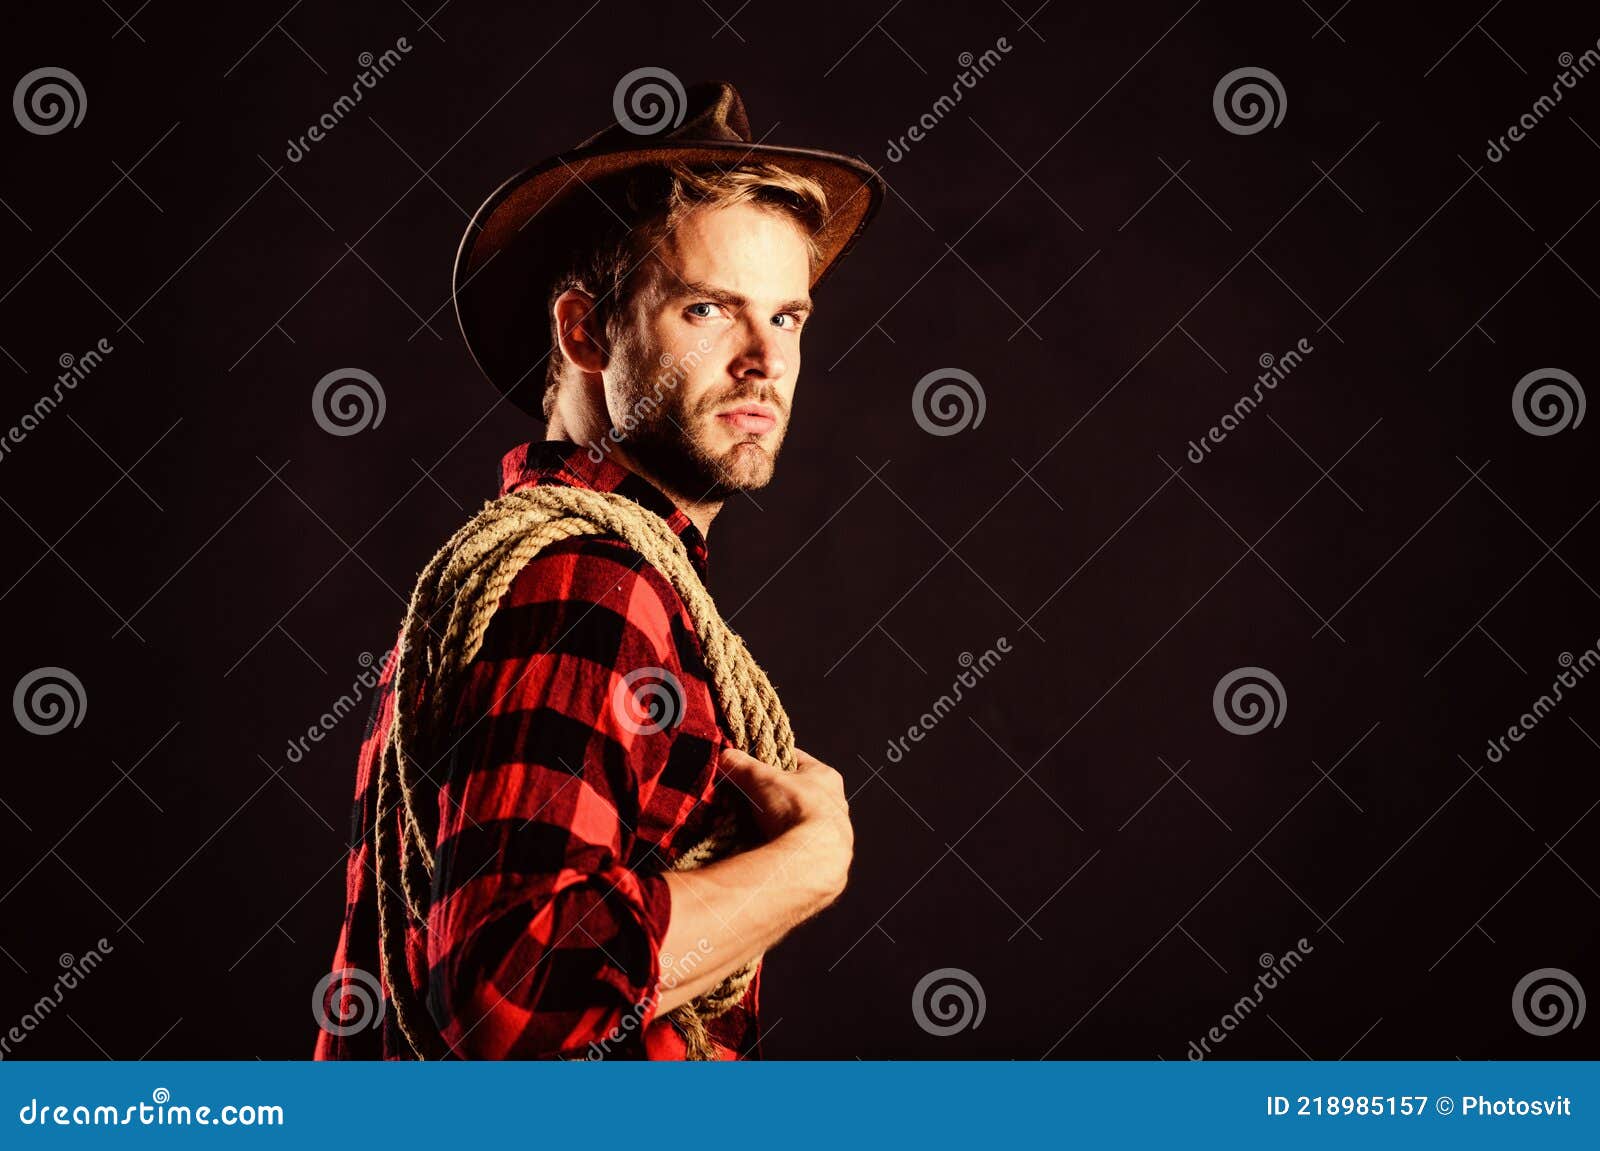 man unshaven cowboy black background. lasso is used in rodeos as part of competitive events. lasso can be tied or